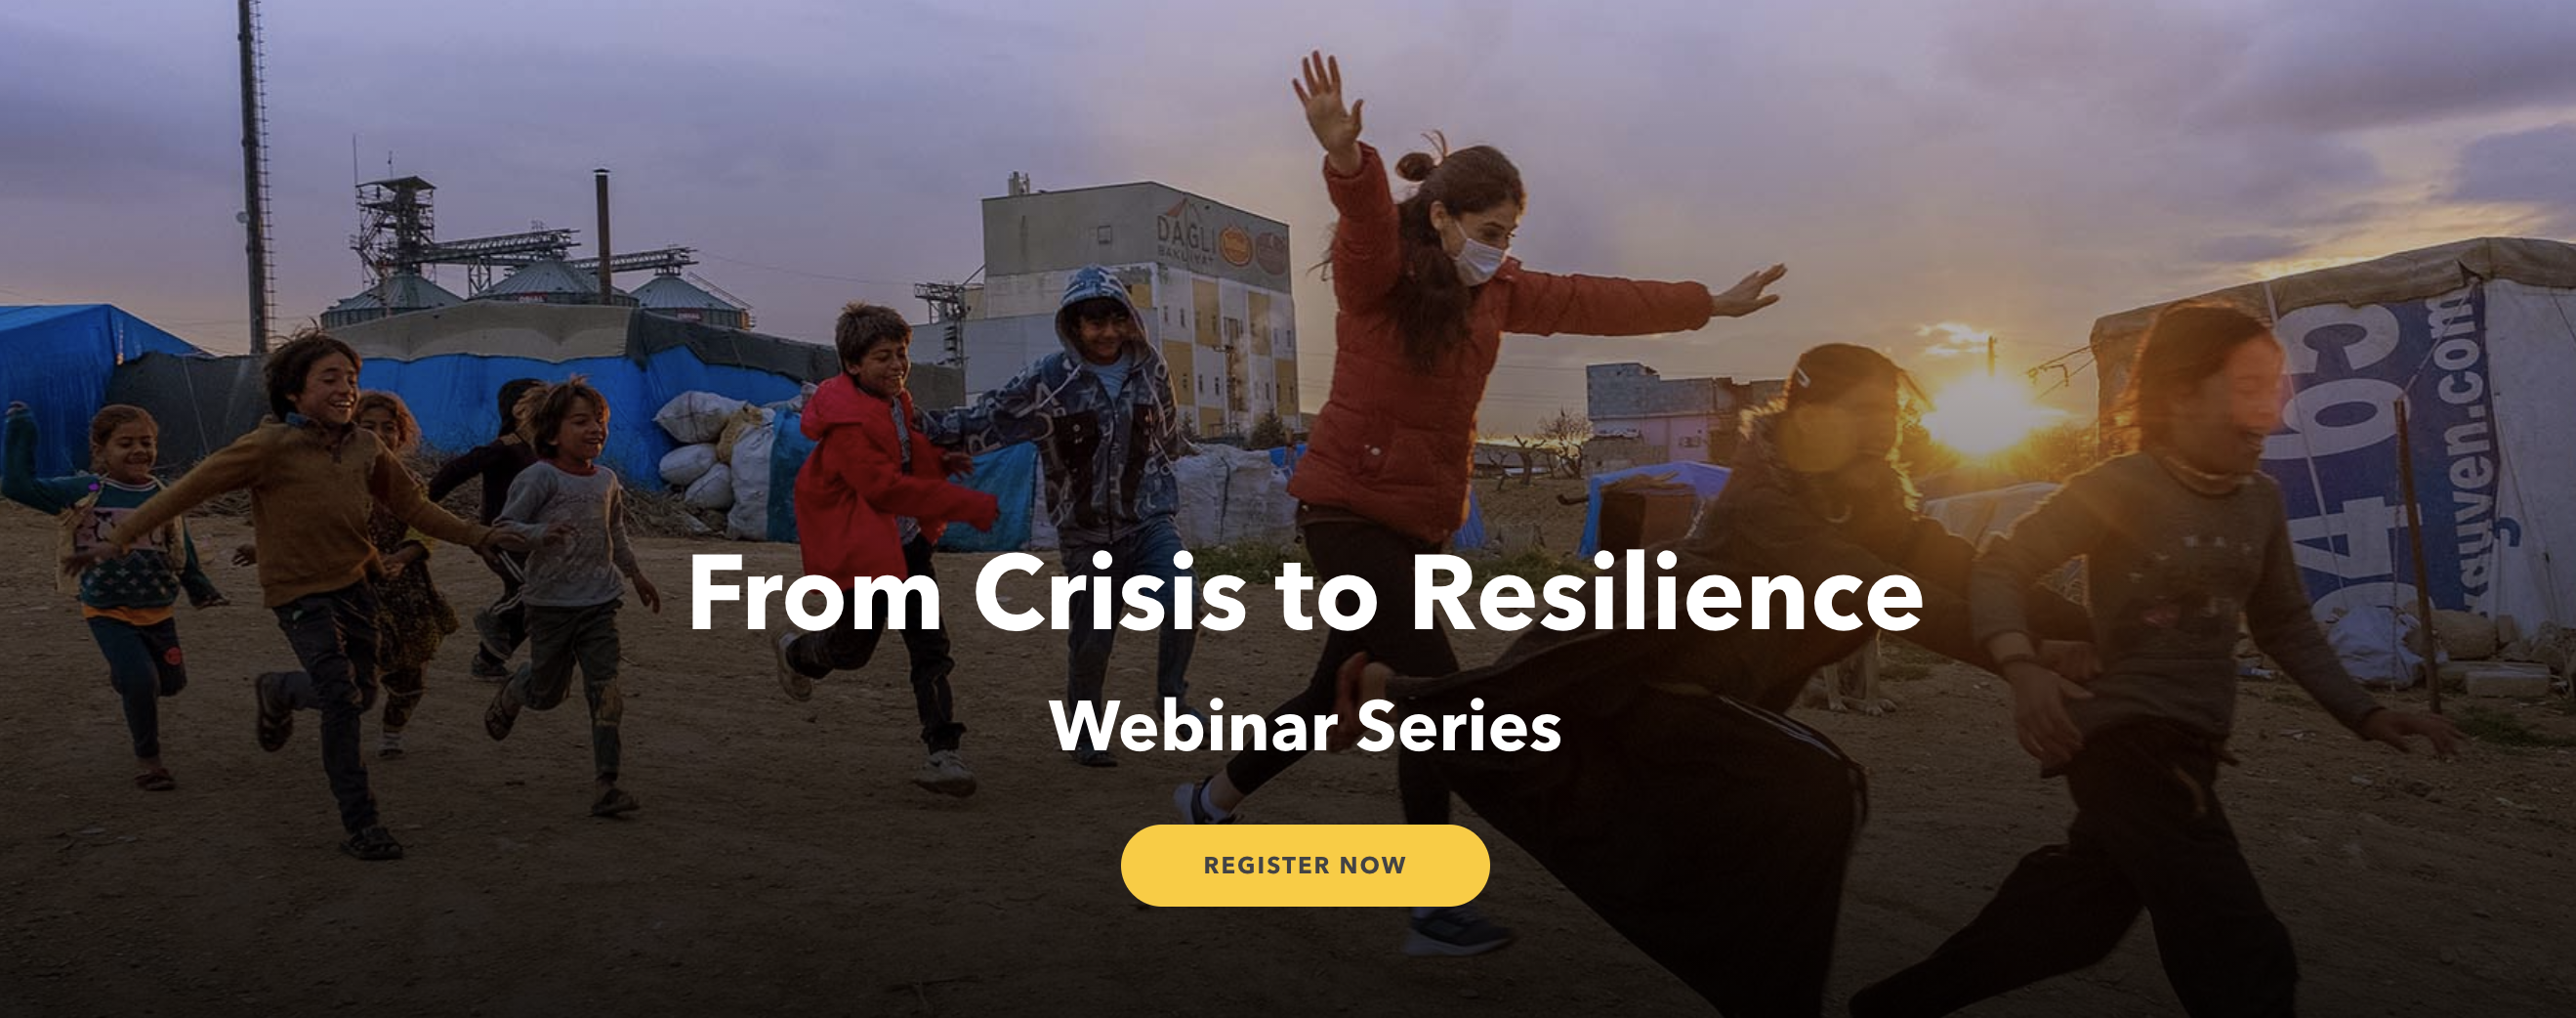 From Crisis to Resilience